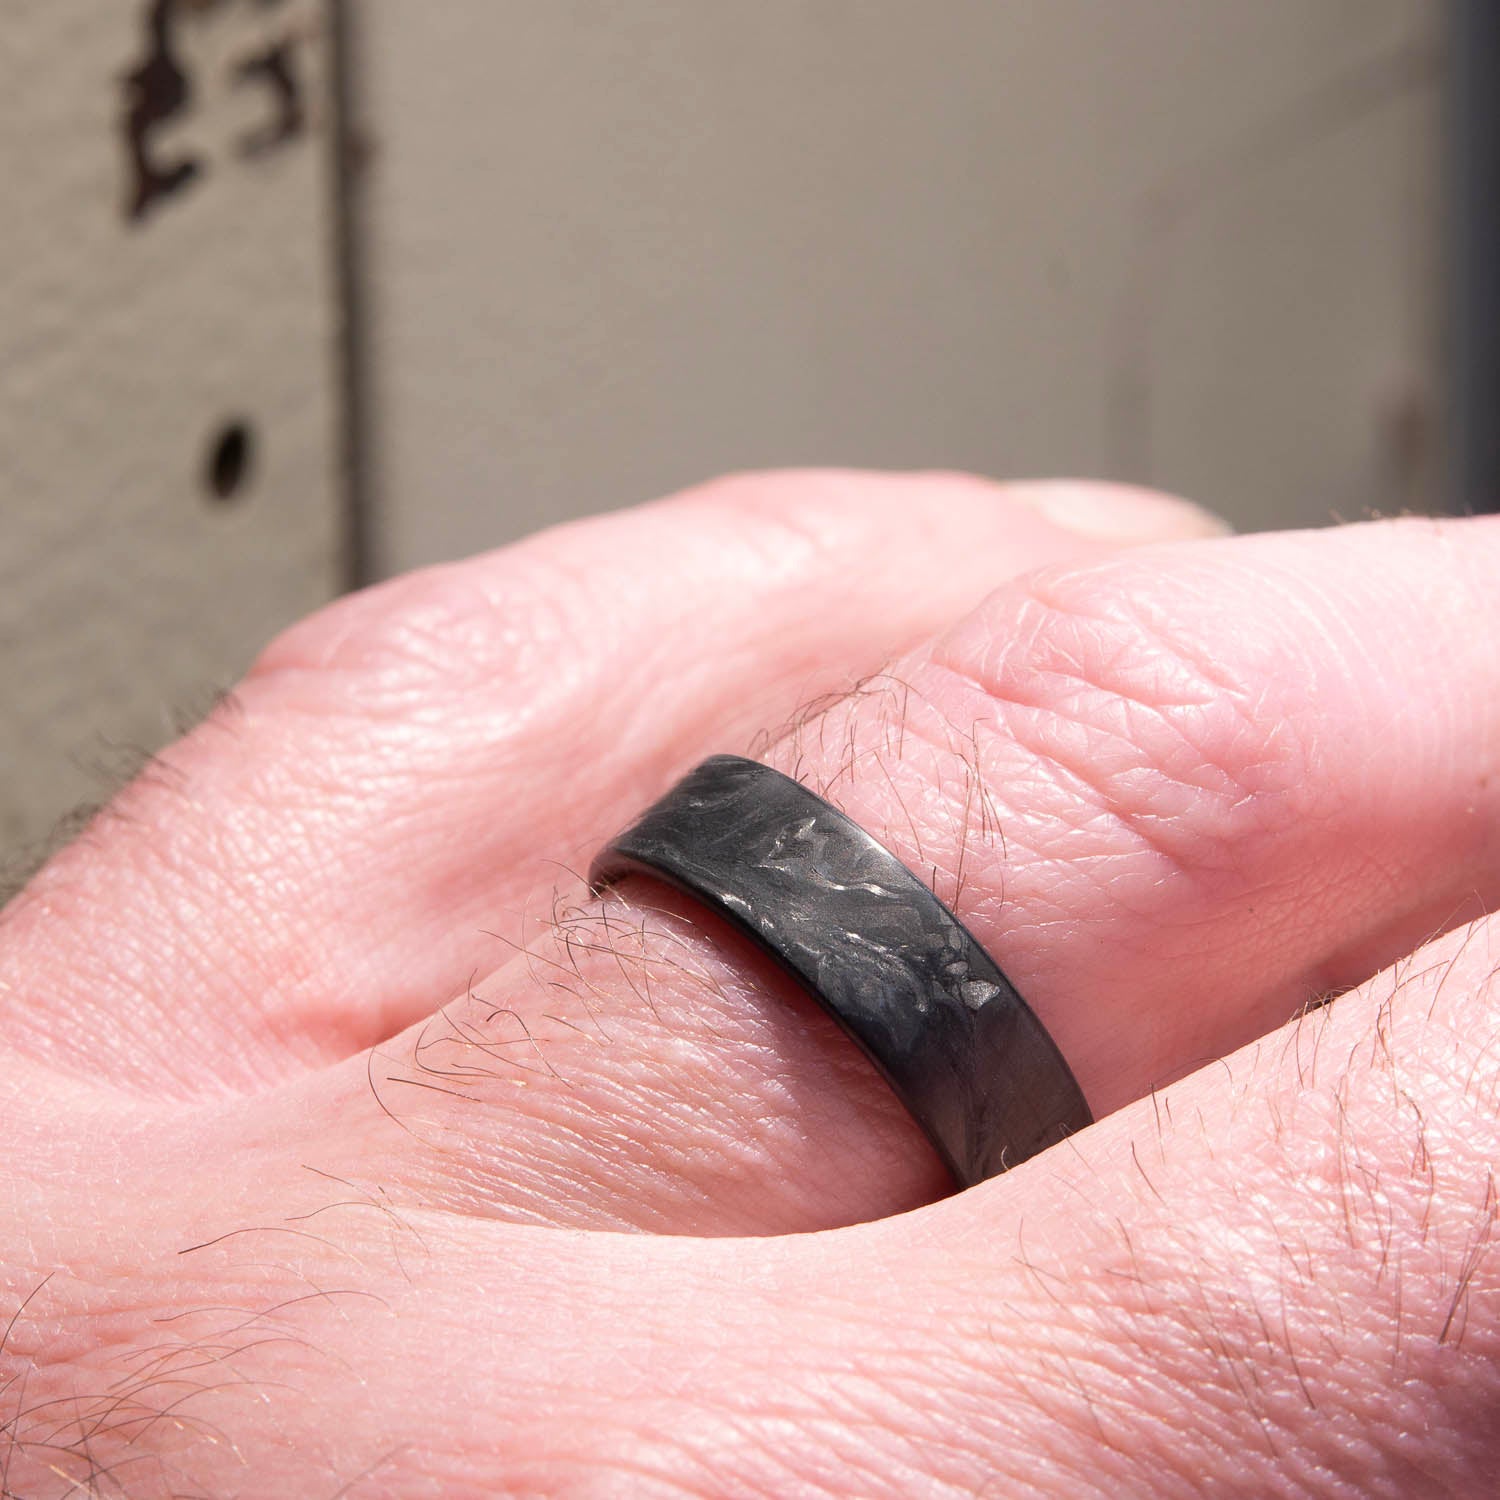 Forged carbon fiber ring with whiskey barrel wood